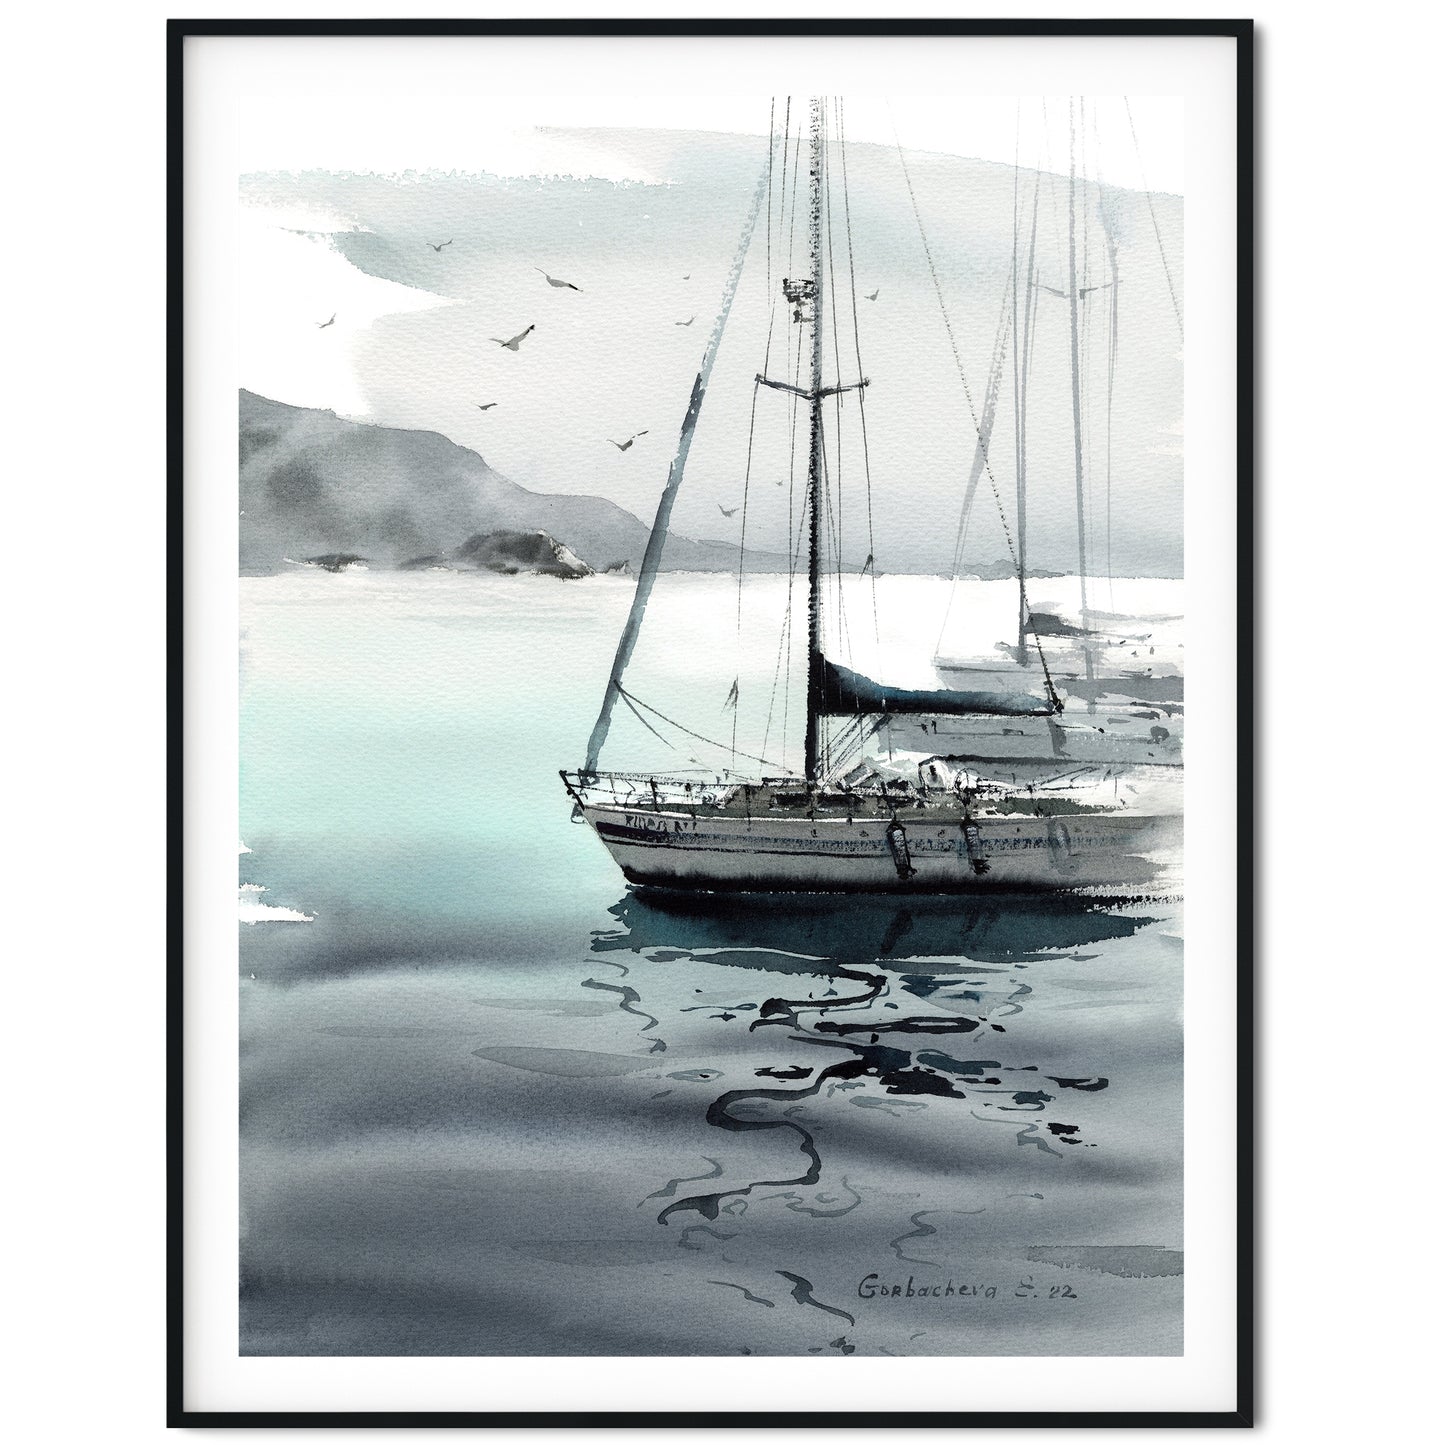 Monochrome Yacht Art, Seascape Print, Bedroom Wall Decor, Sailboat Watercolor Painting on Canvas, Home Wall Decor, Gift